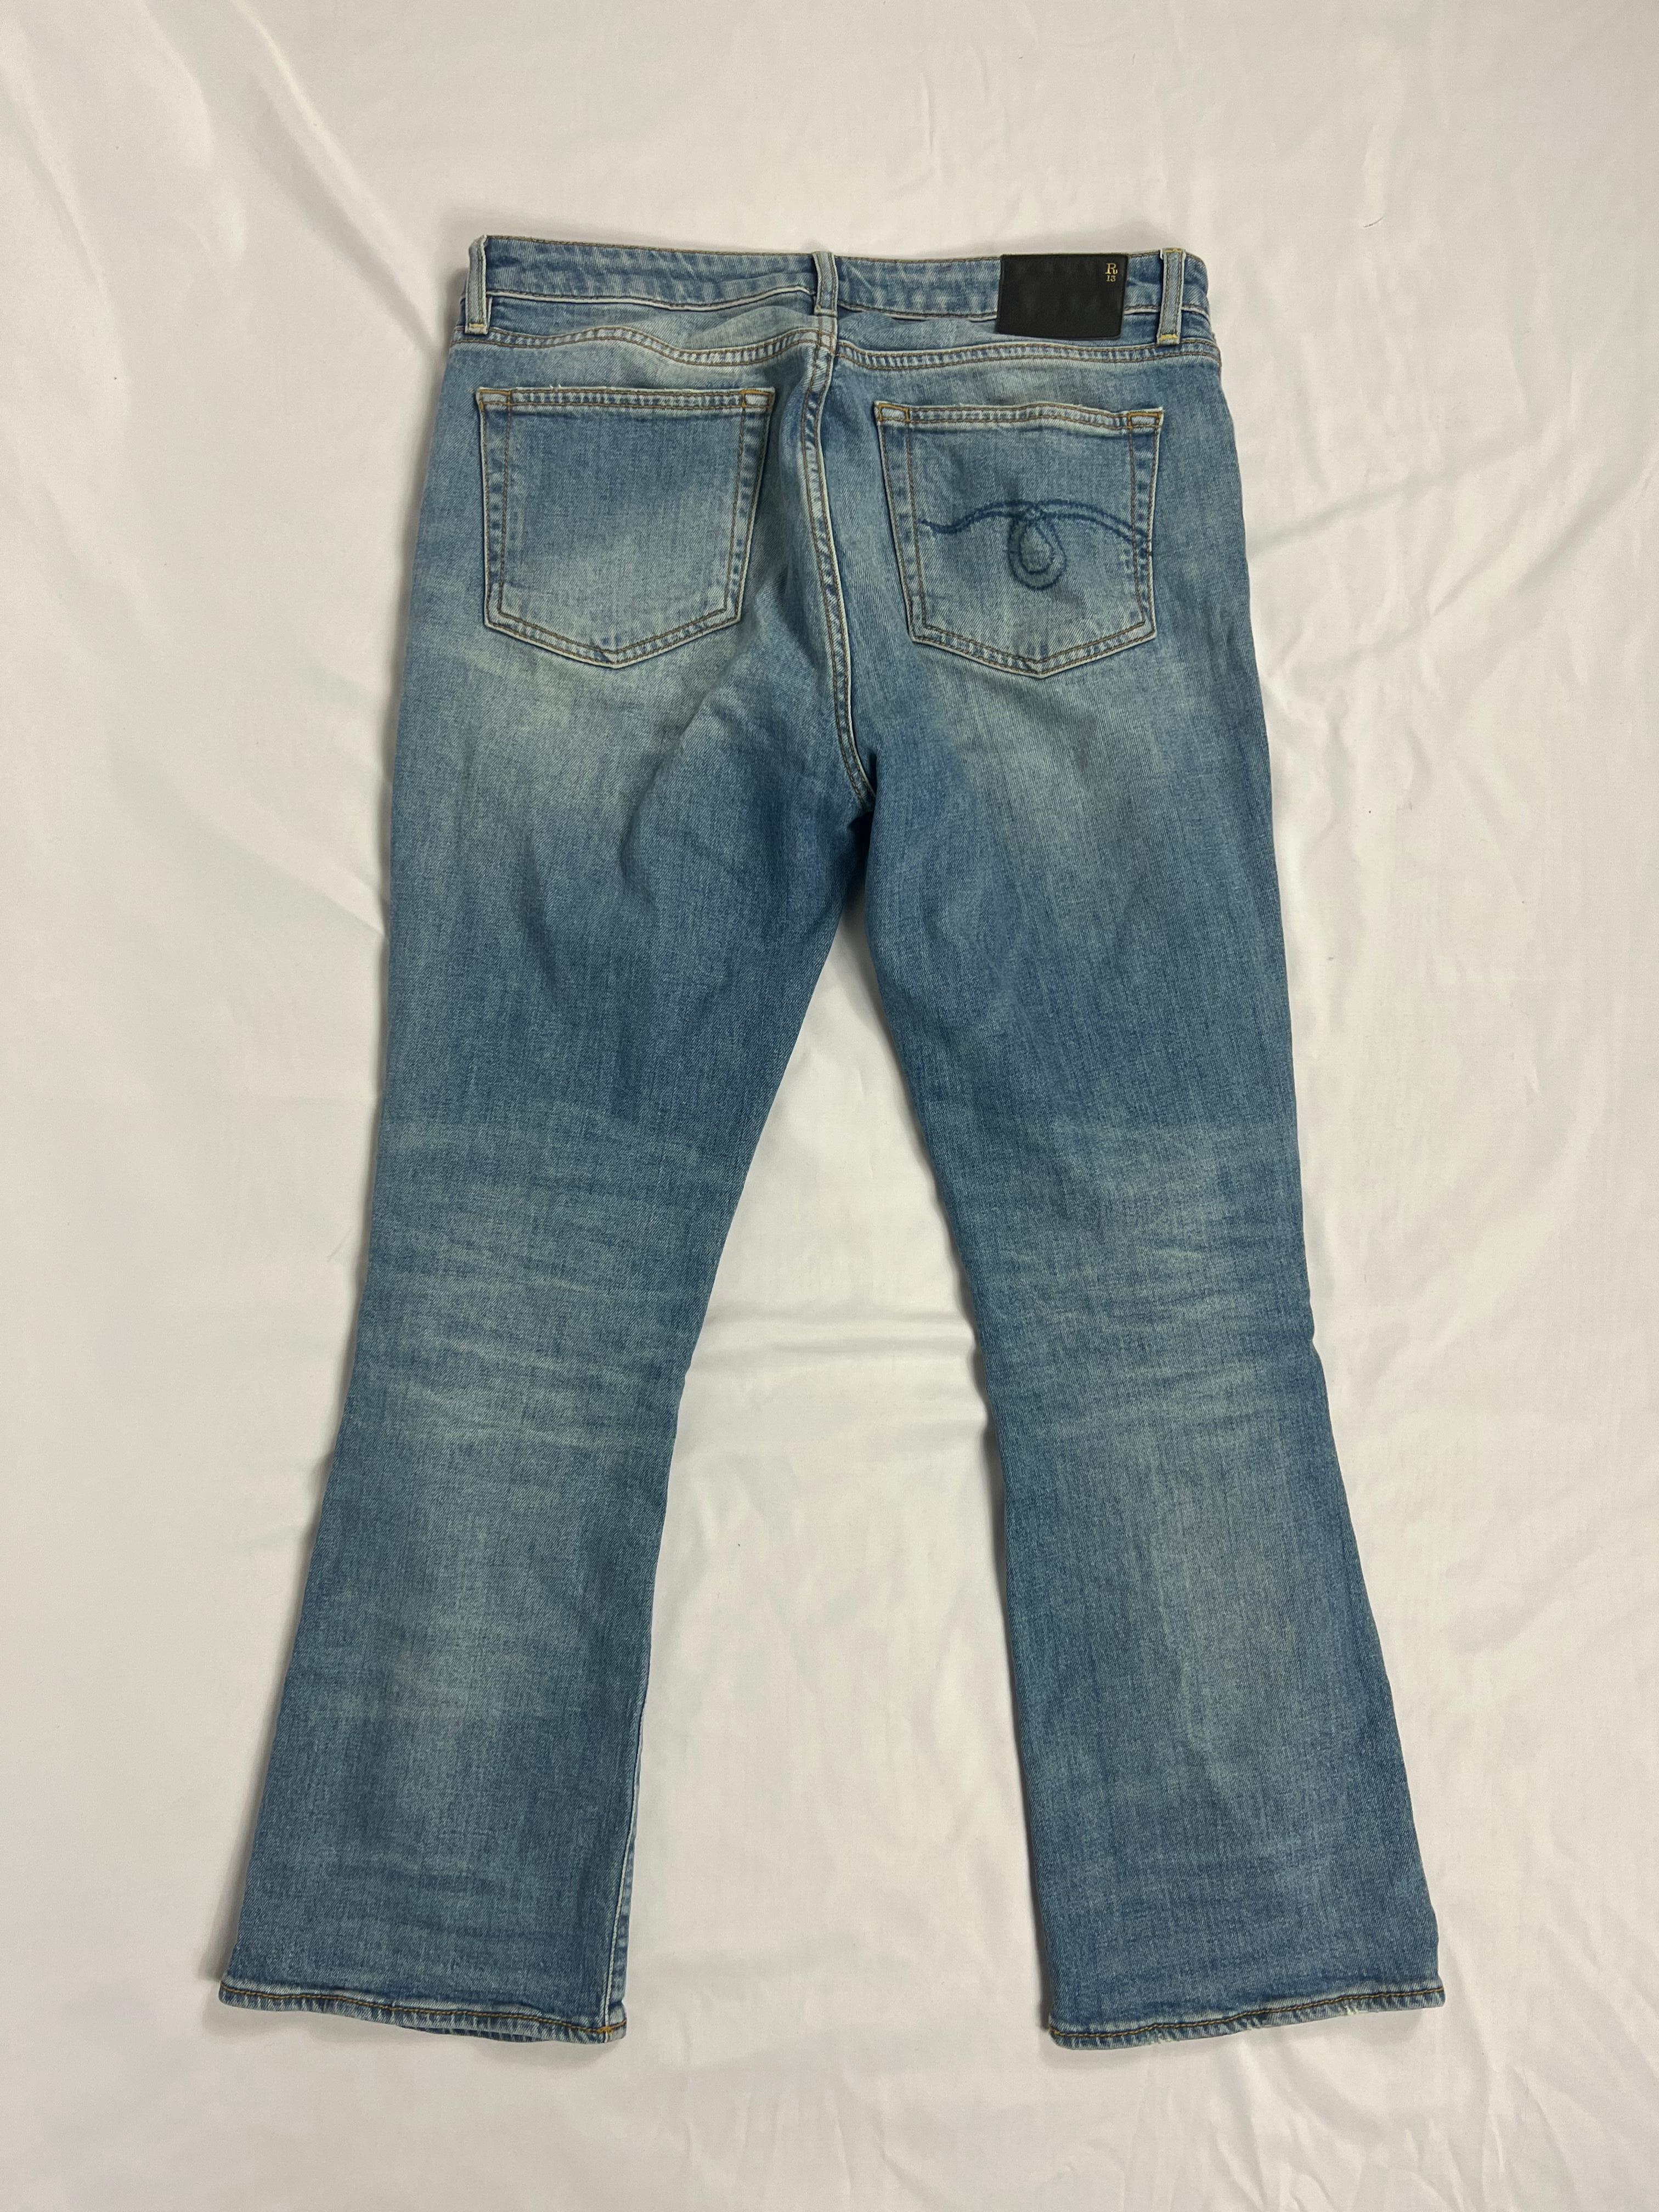 R13 Drew Stretch Kick Fit Denim Jeans, Size 28 In Excellent Condition For Sale In Beverly Hills, CA